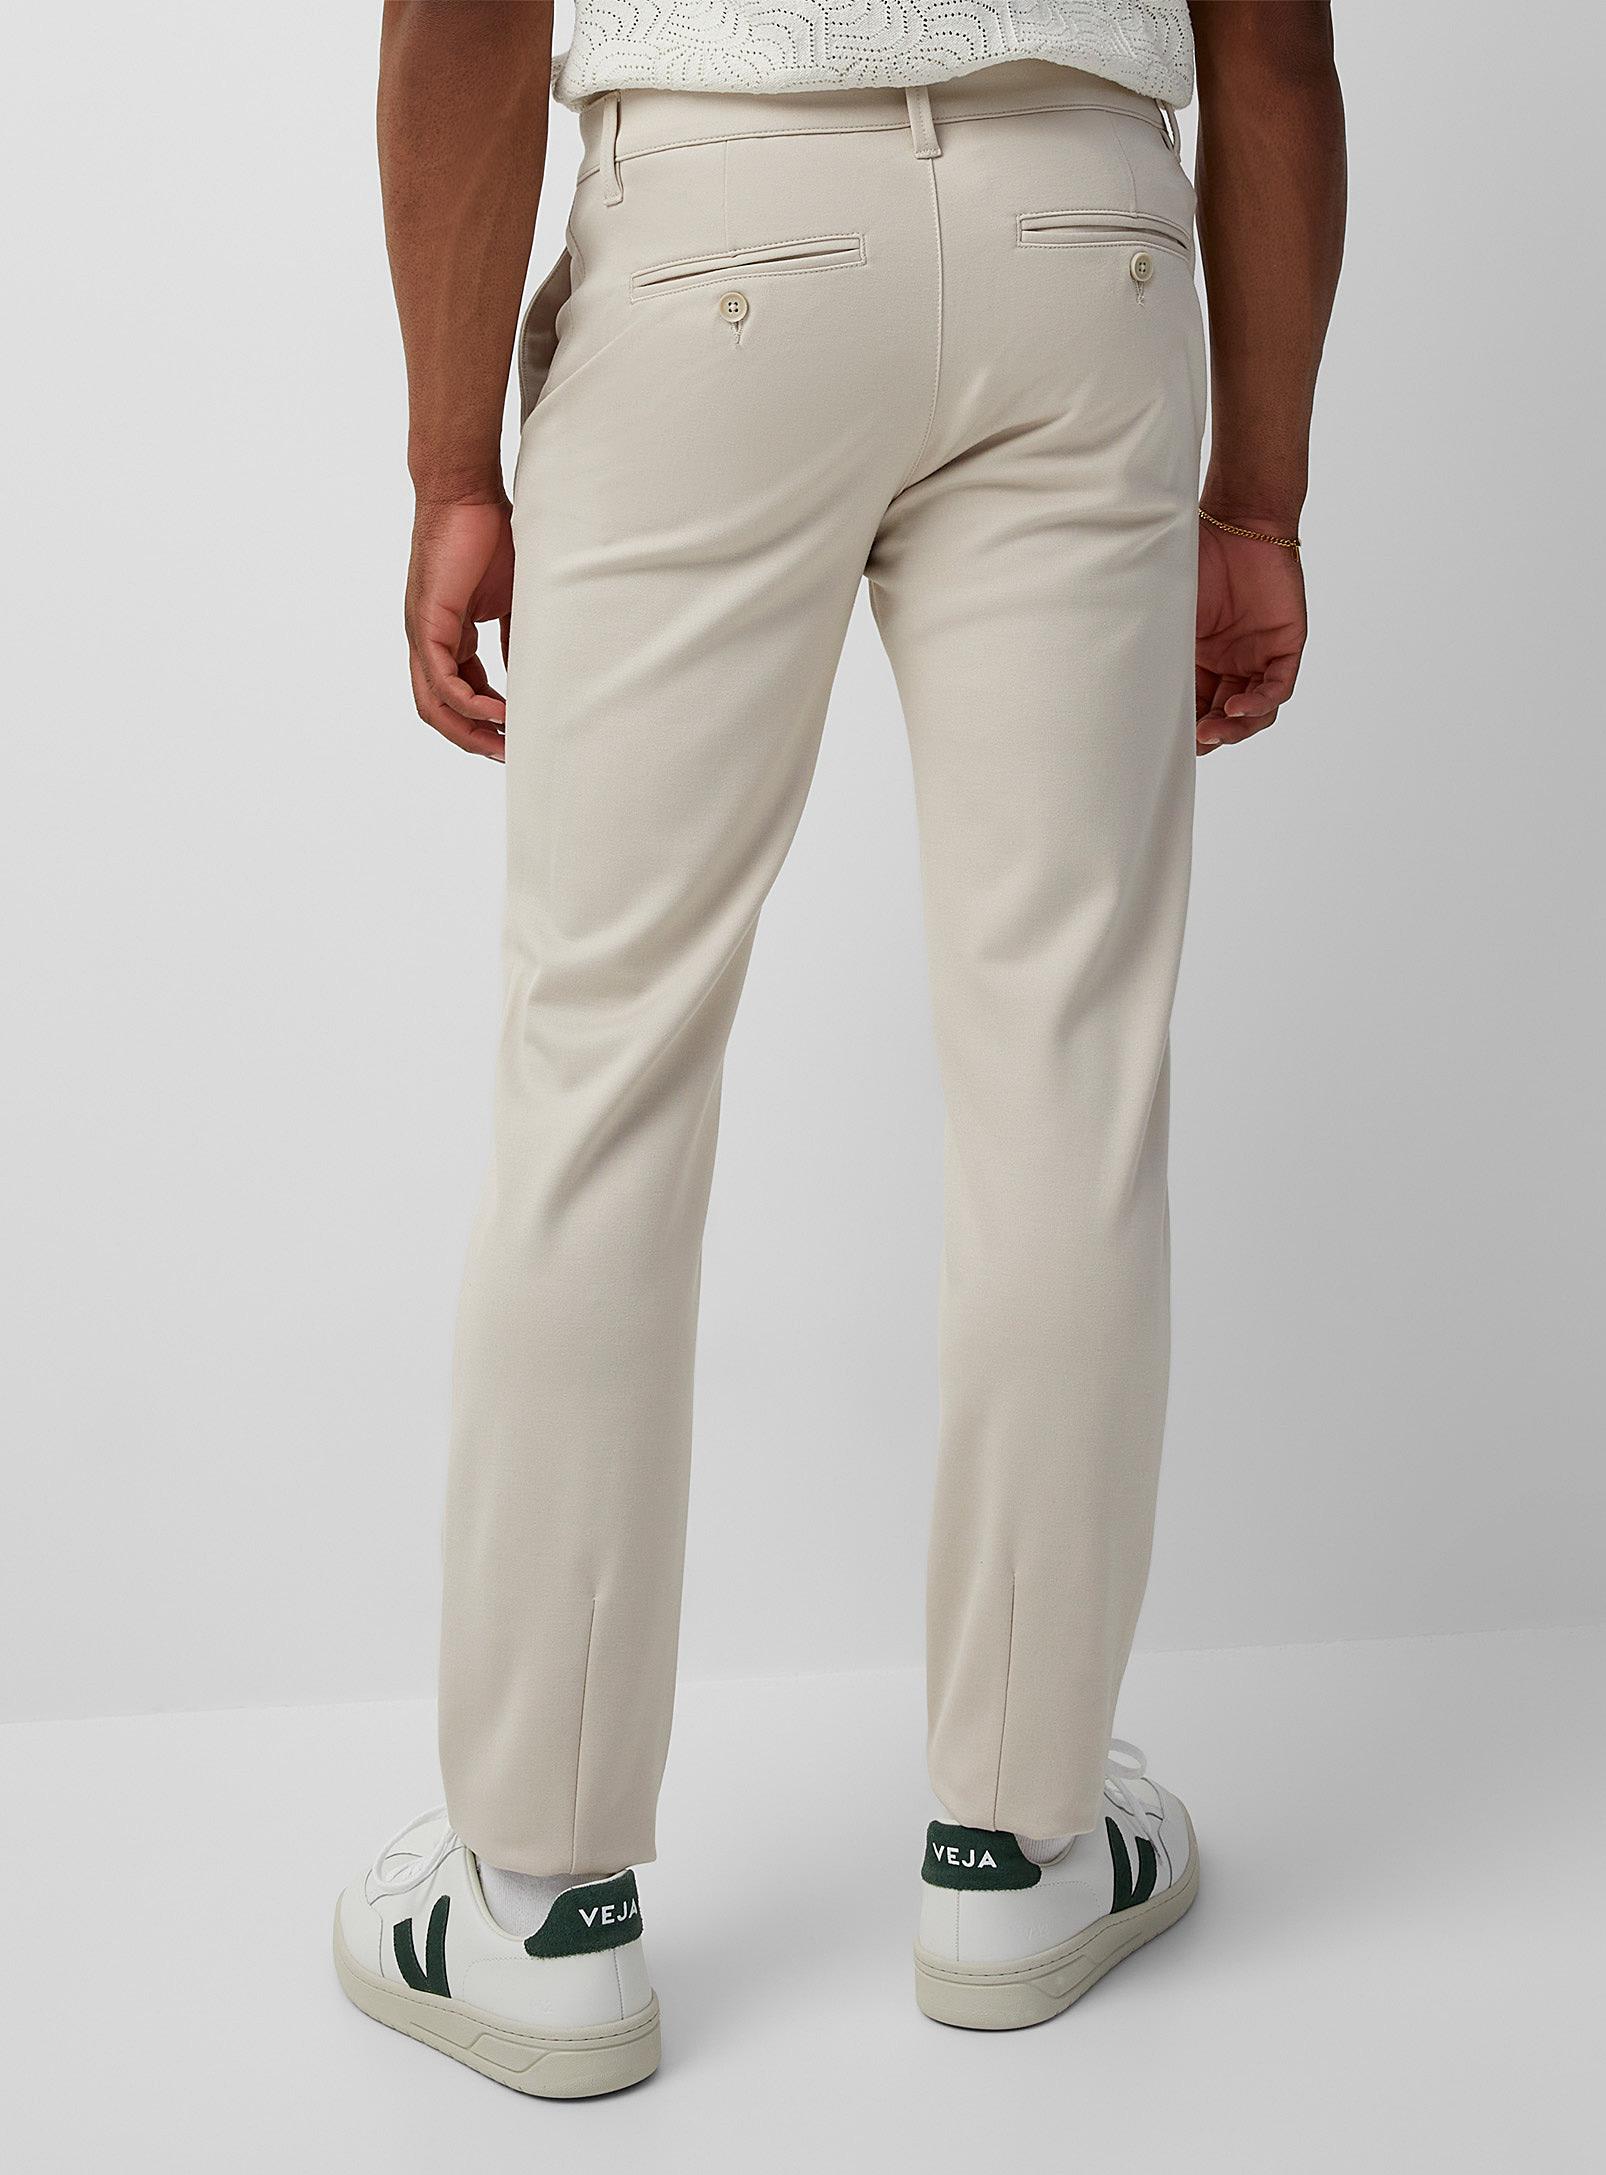 Only & Sons Mark Knit Pant Slim Fit in White for Men